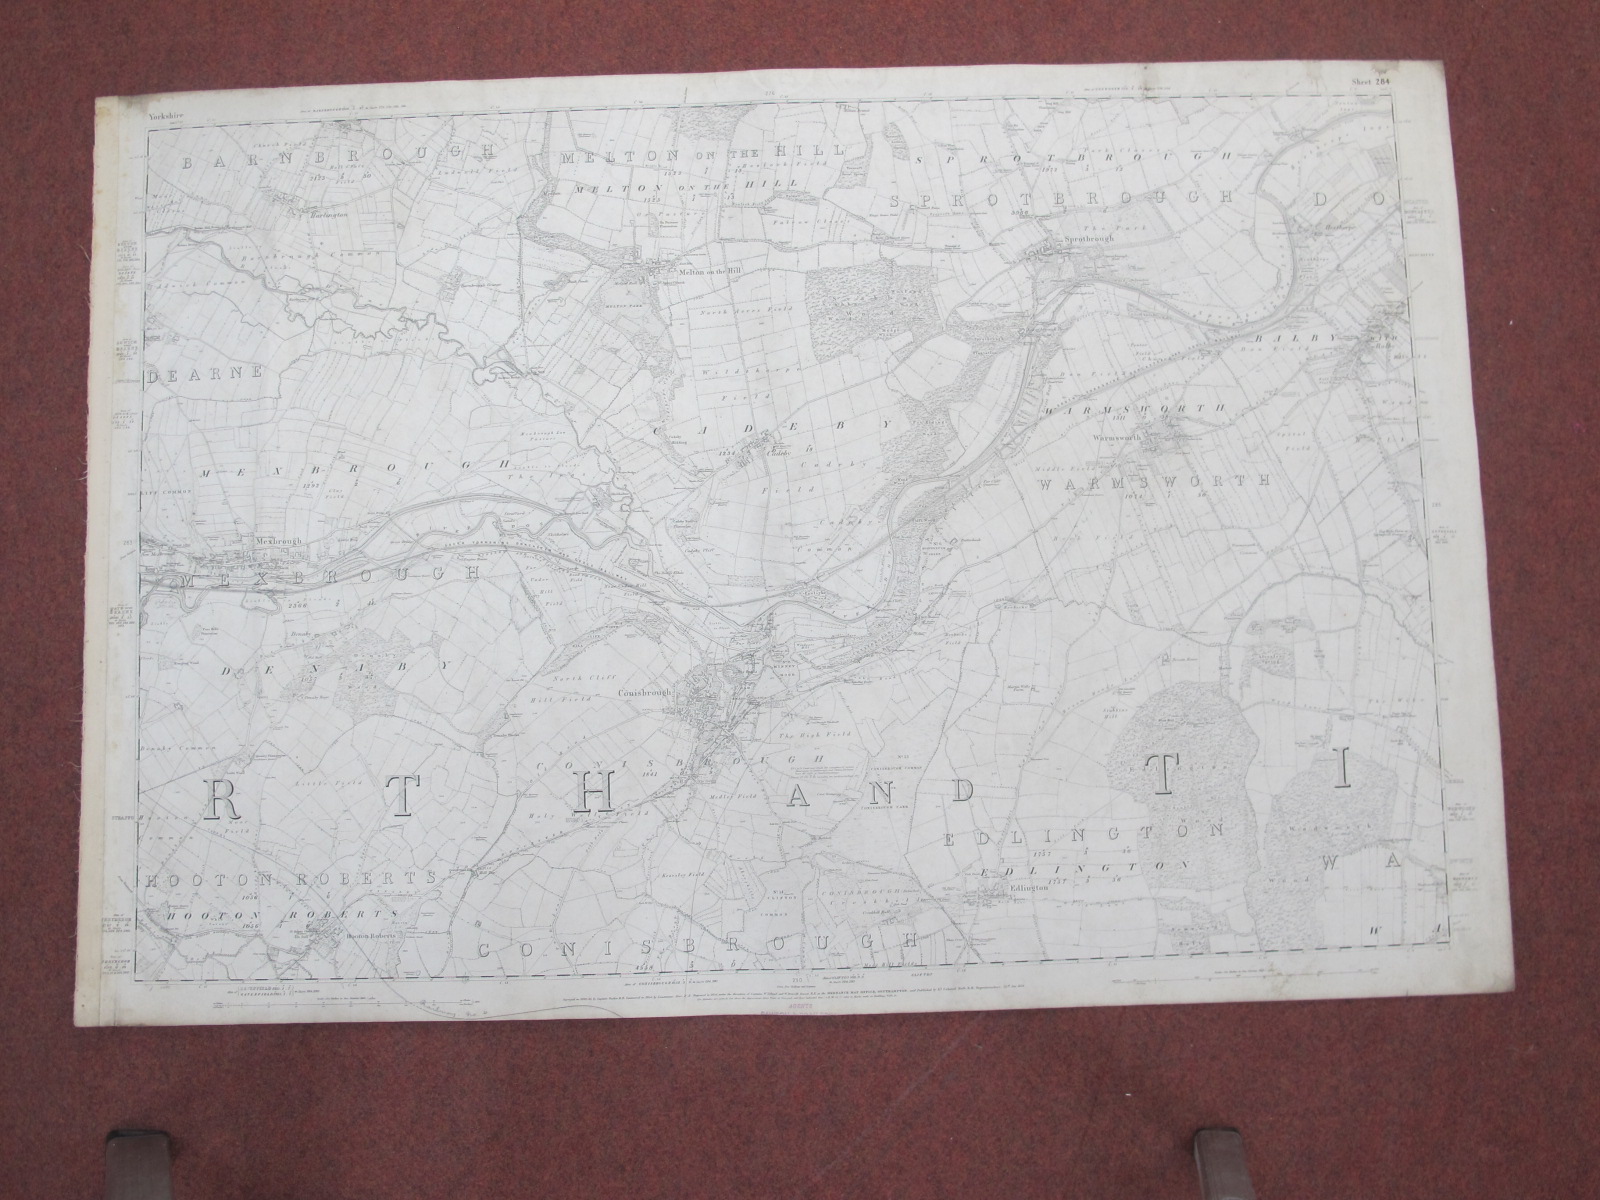 West Riding Yorkshire Maps, Rotherham and area - some dates noted 1902, 1903, 1922, 1935, various - Image 7 of 11